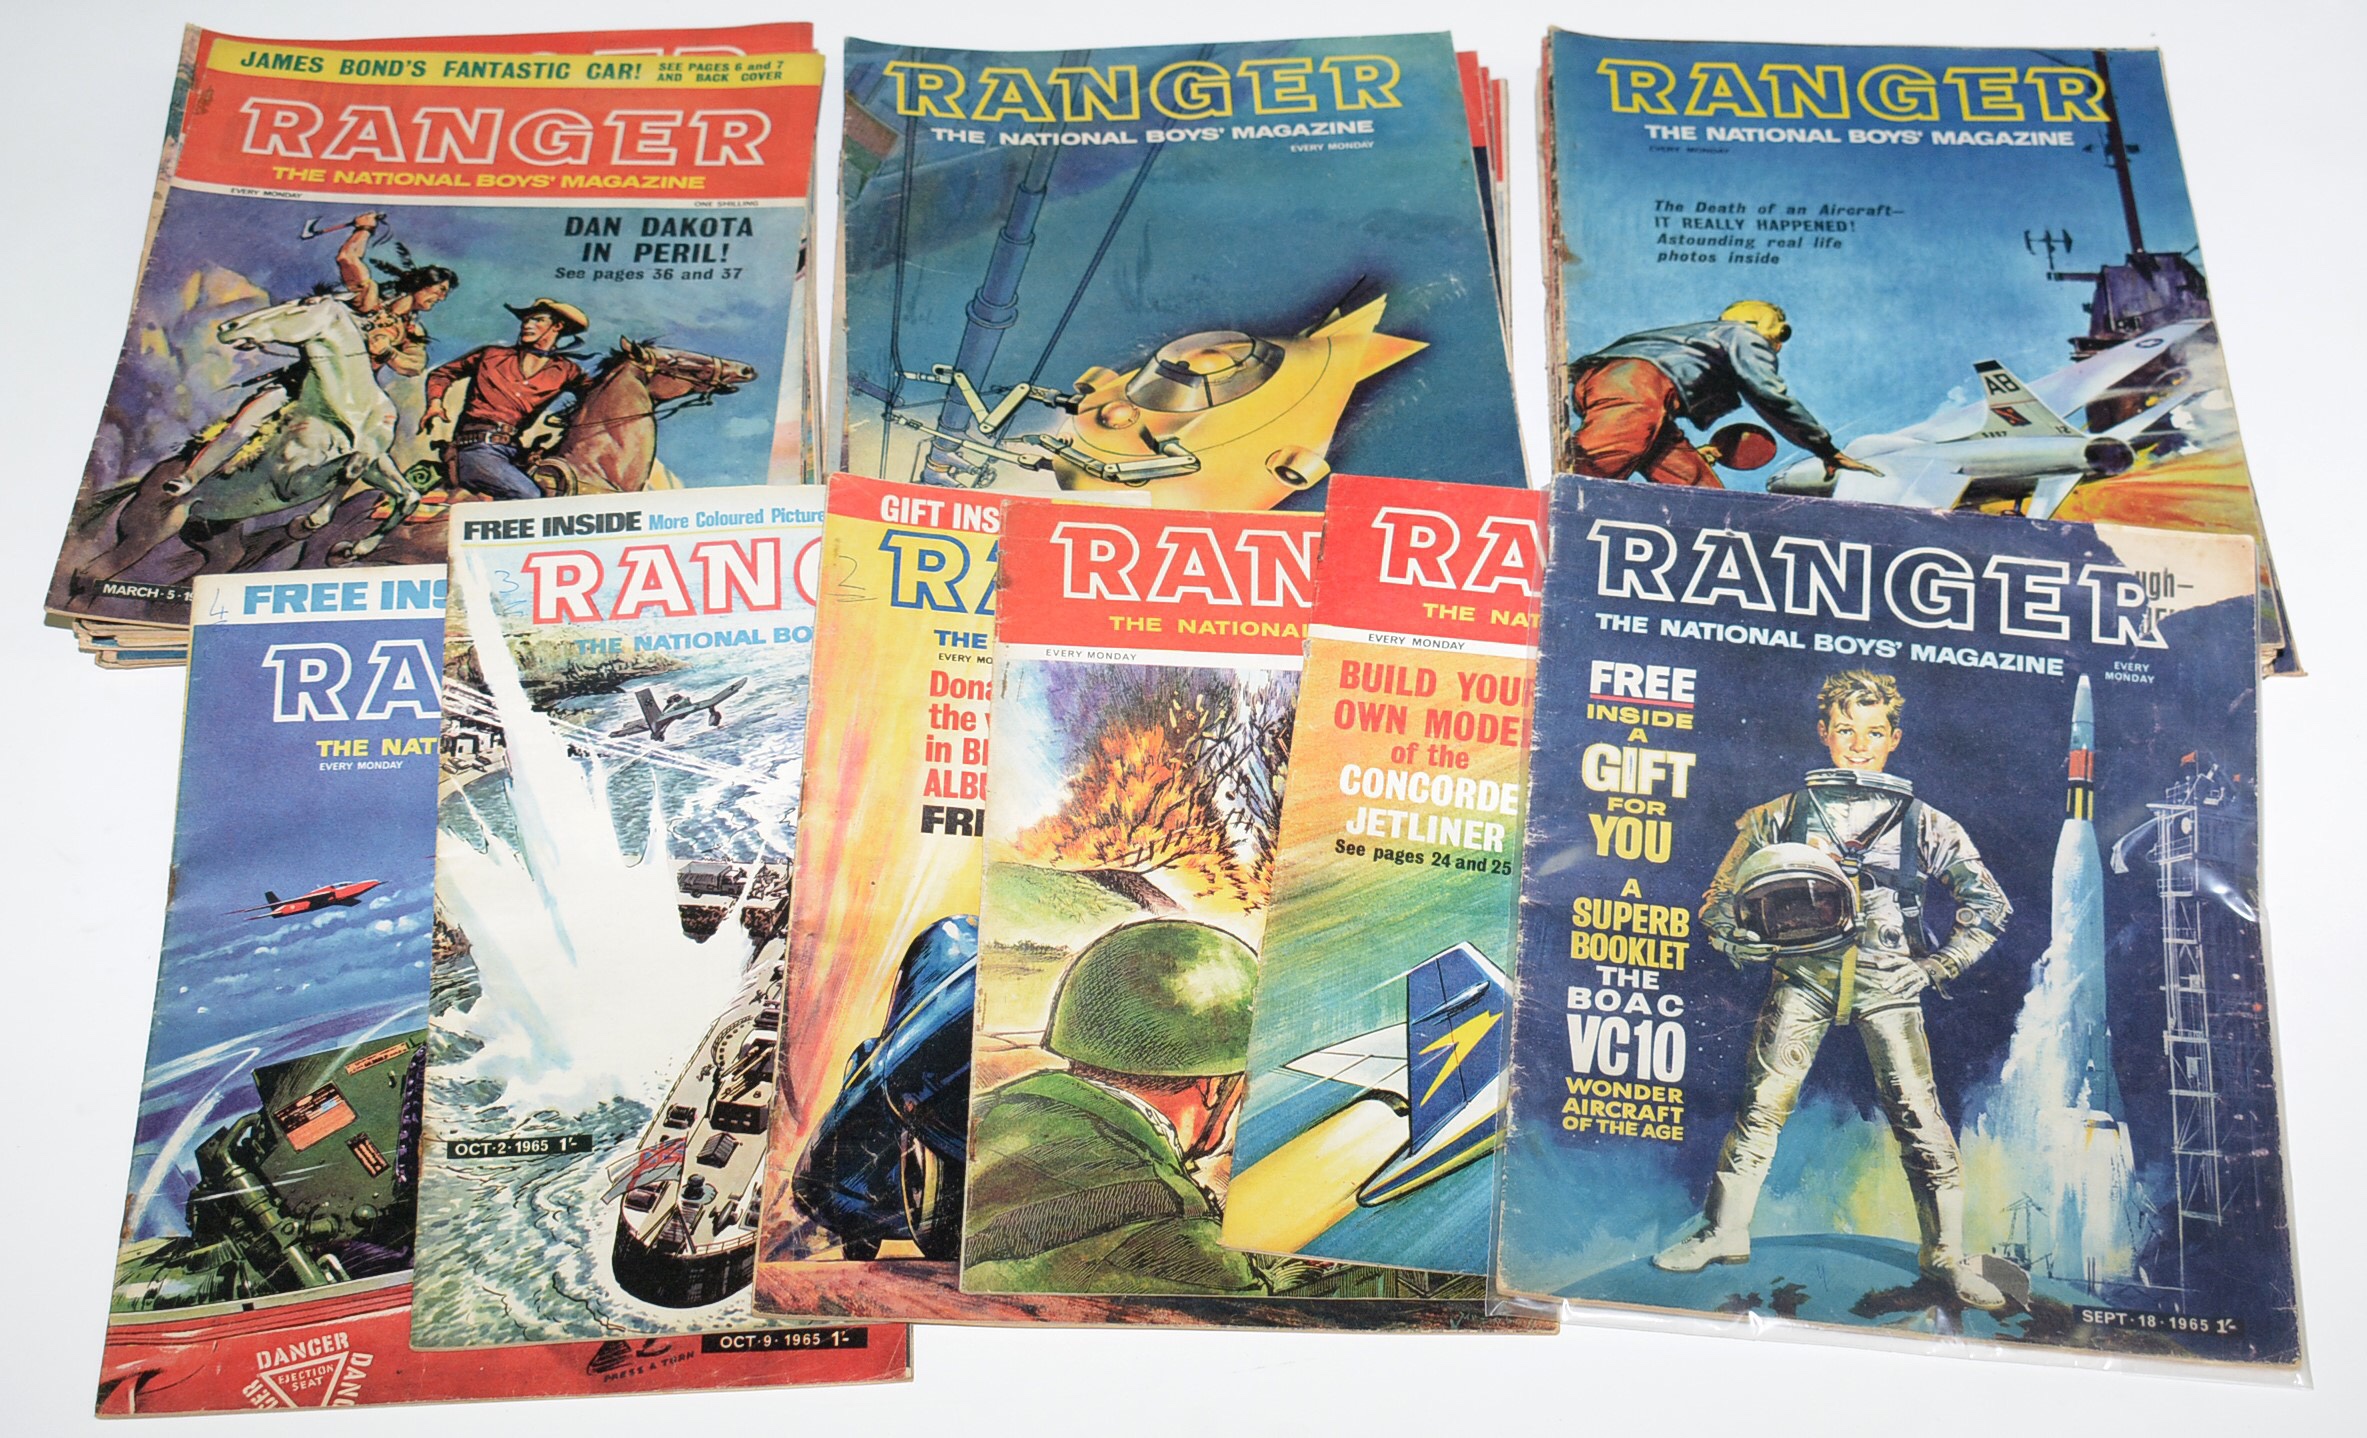 Ranger: The National Boys' Magazine, No's. 1-40, published by Fleetway (September 18th 1965-June 18th 1966)